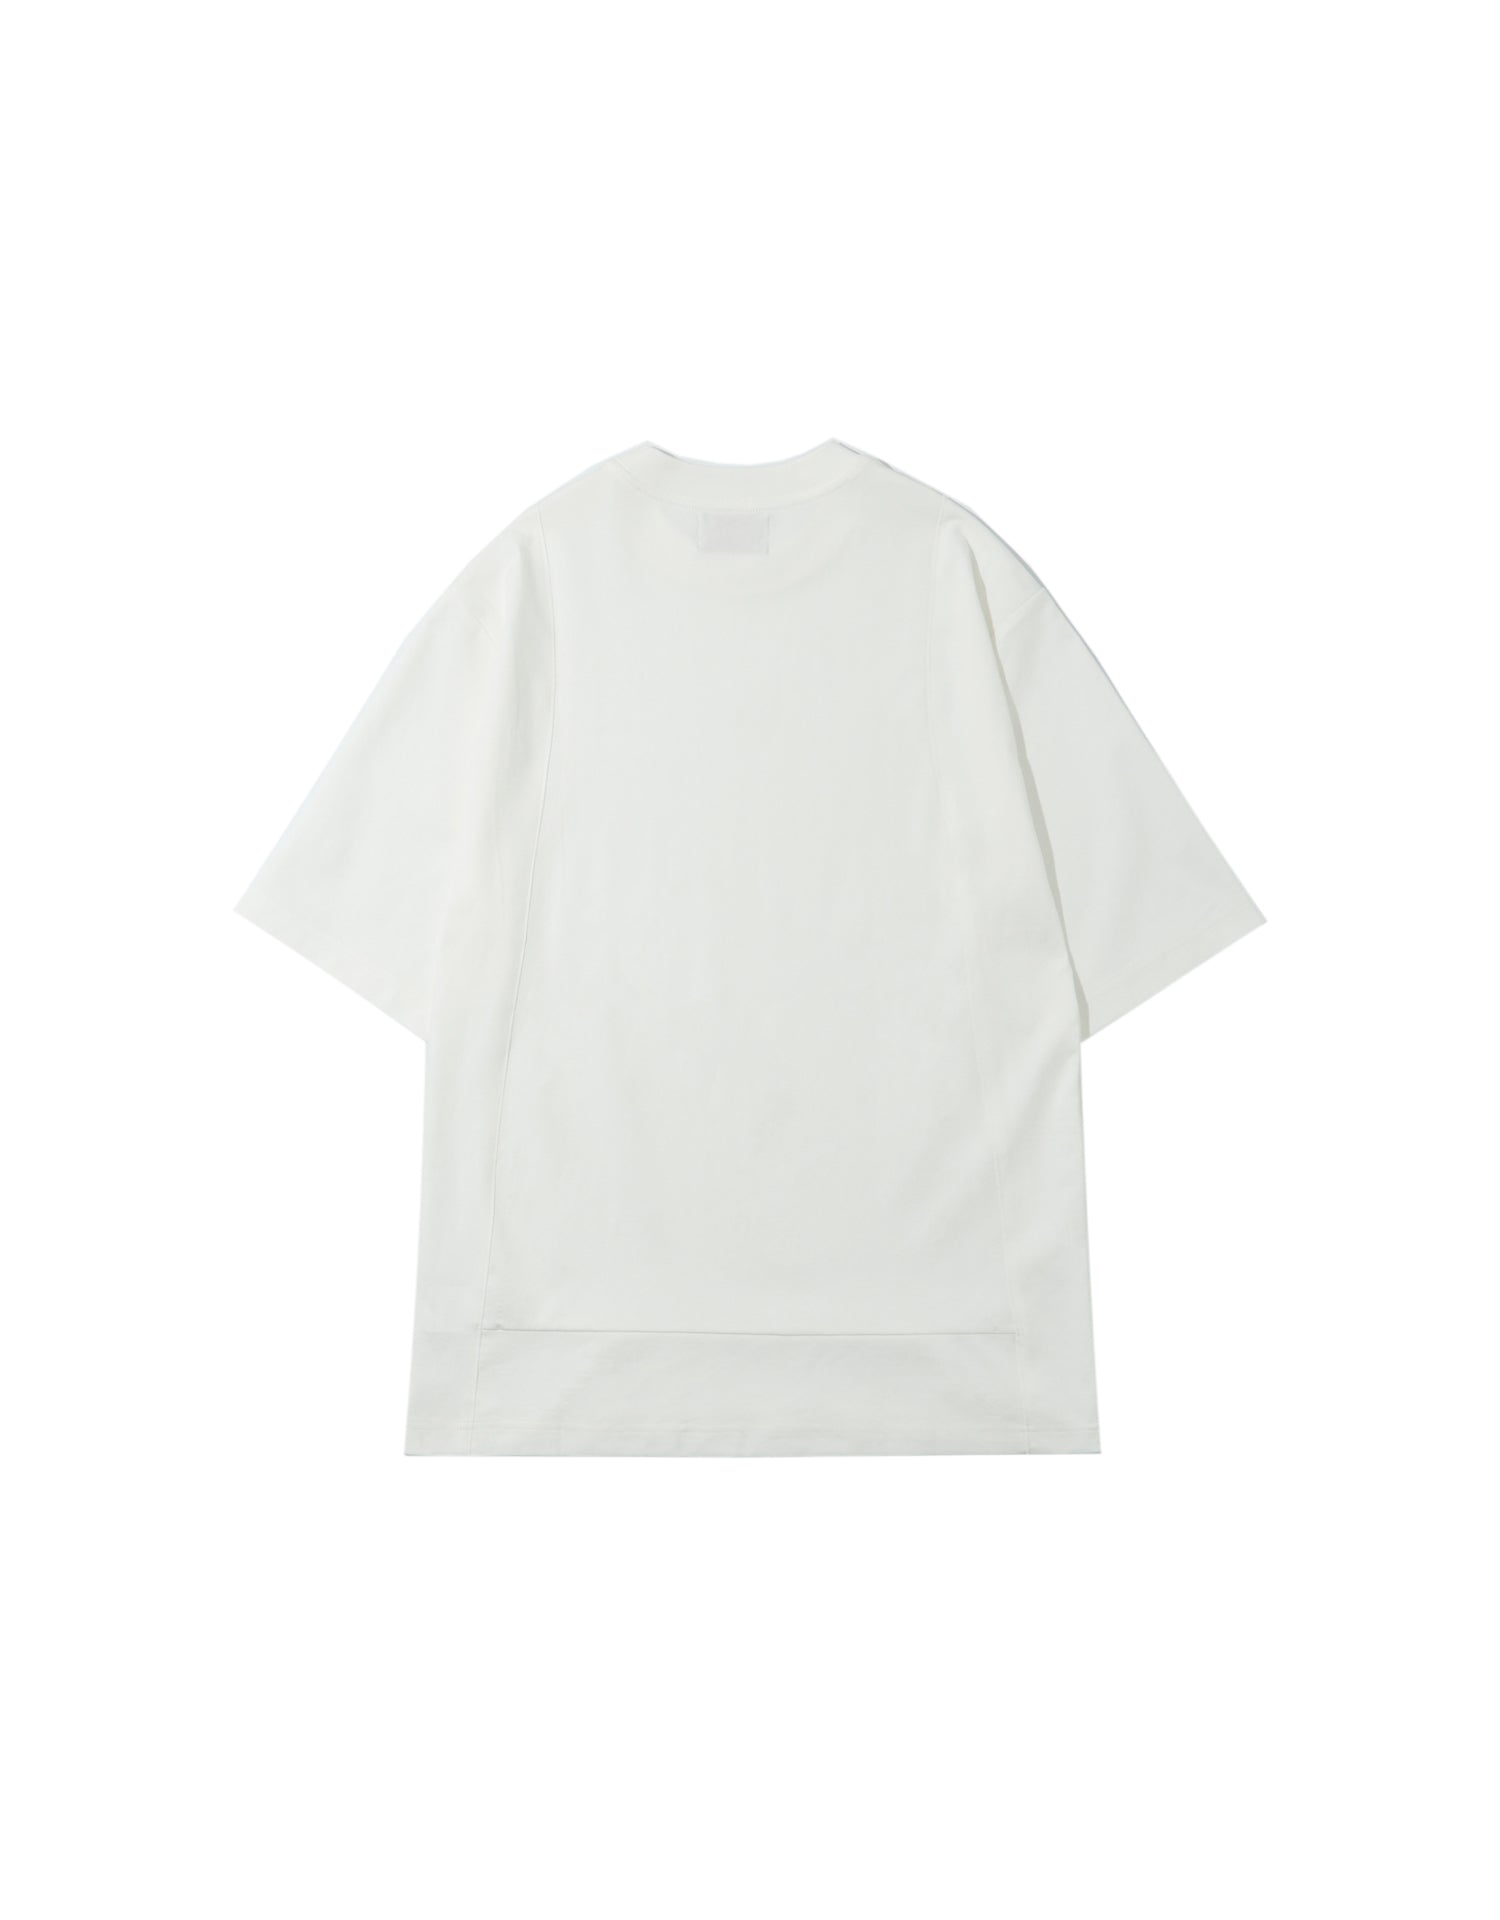 TopBasics Embroidered Twower T-Shirt